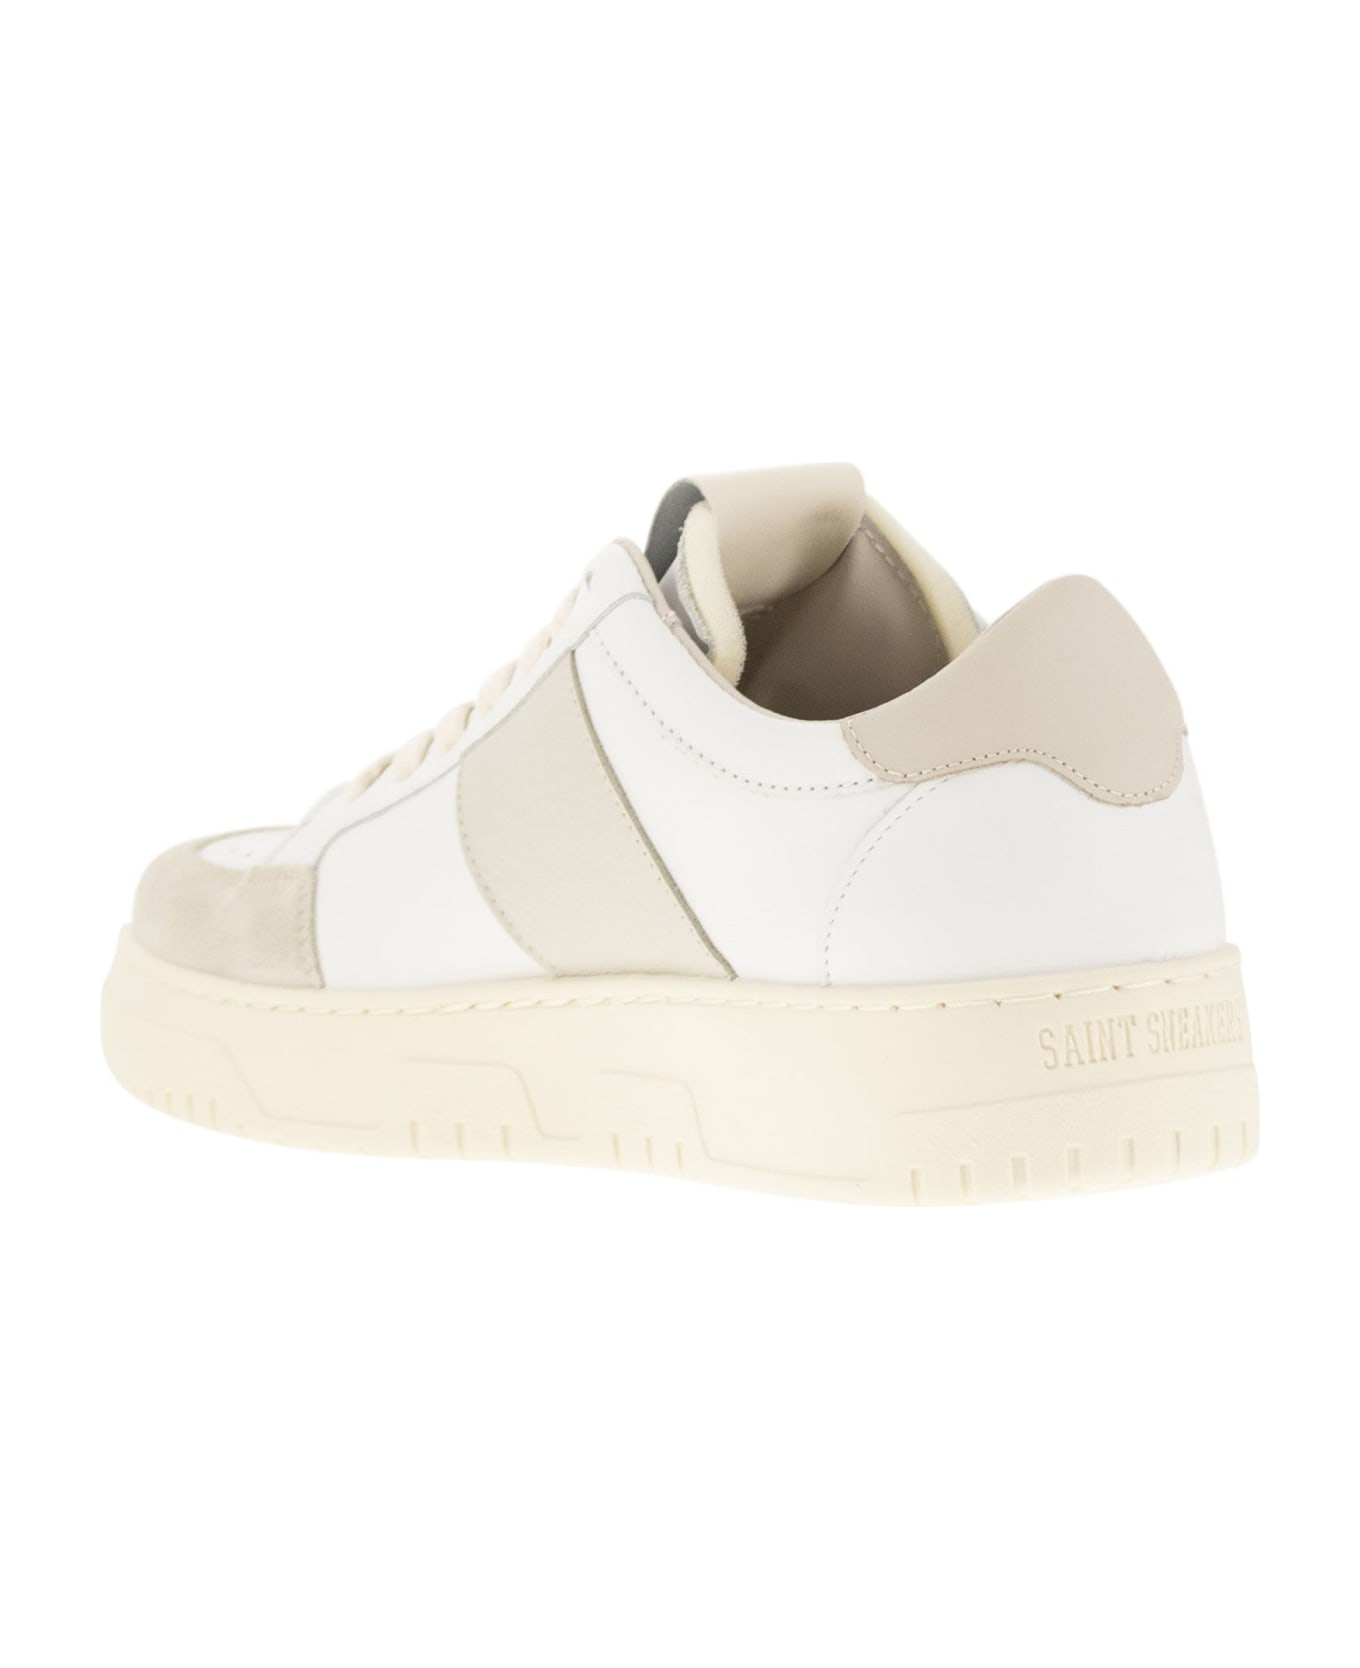 Saint Sneakers Sail - Leather And Suede Trainers - White